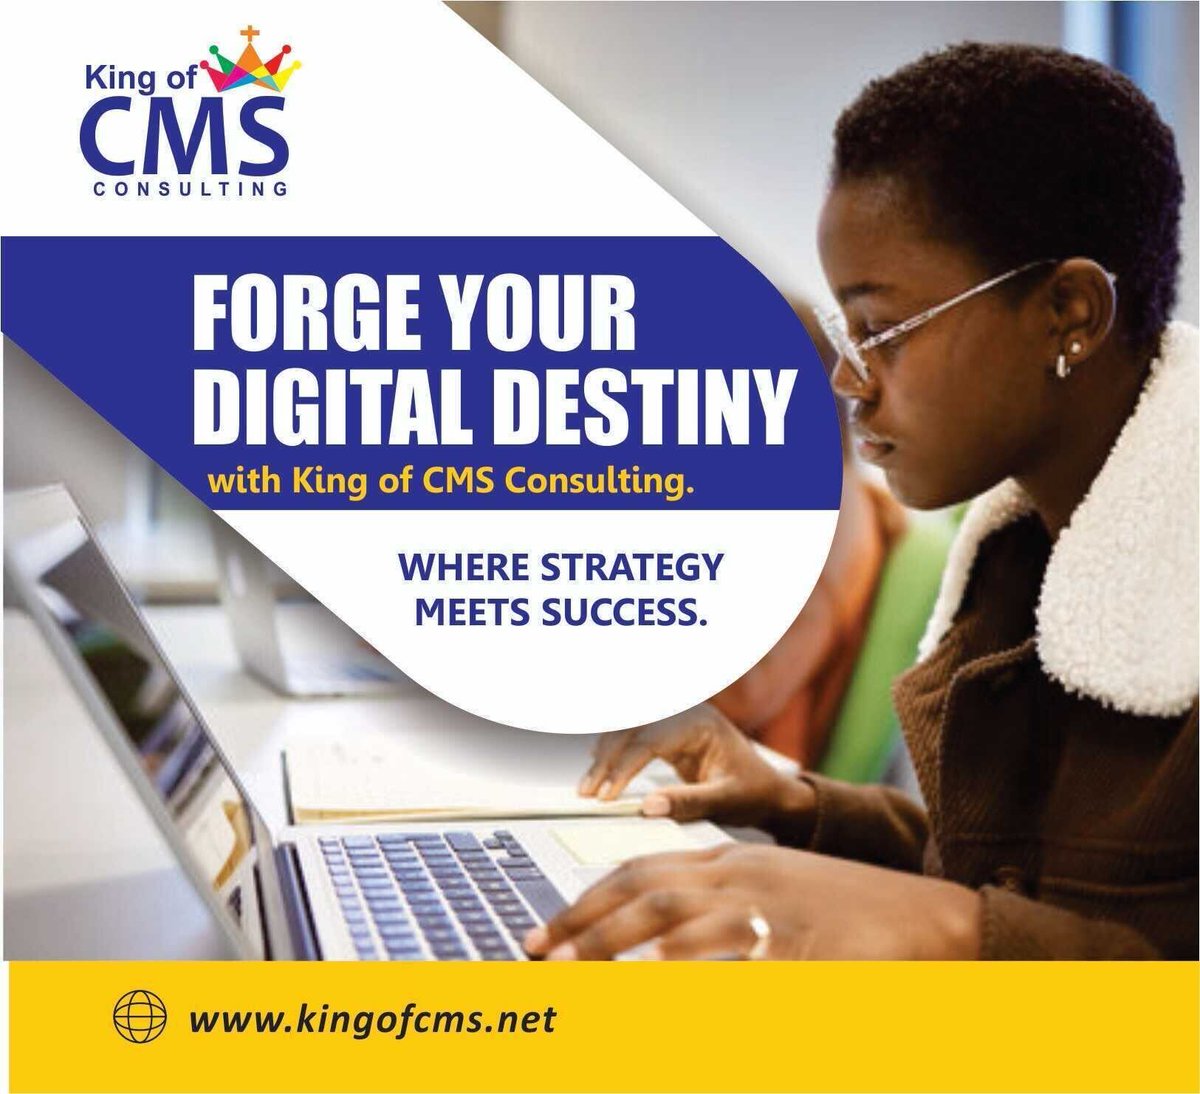 Take charge of your digital identity by working with King of CMS Consulting. Take control of the digital sphere and establish your dominance with our customised solutions.
#ITsolutions #DigitalTransformation #ChatGPT #tuesdayvibe